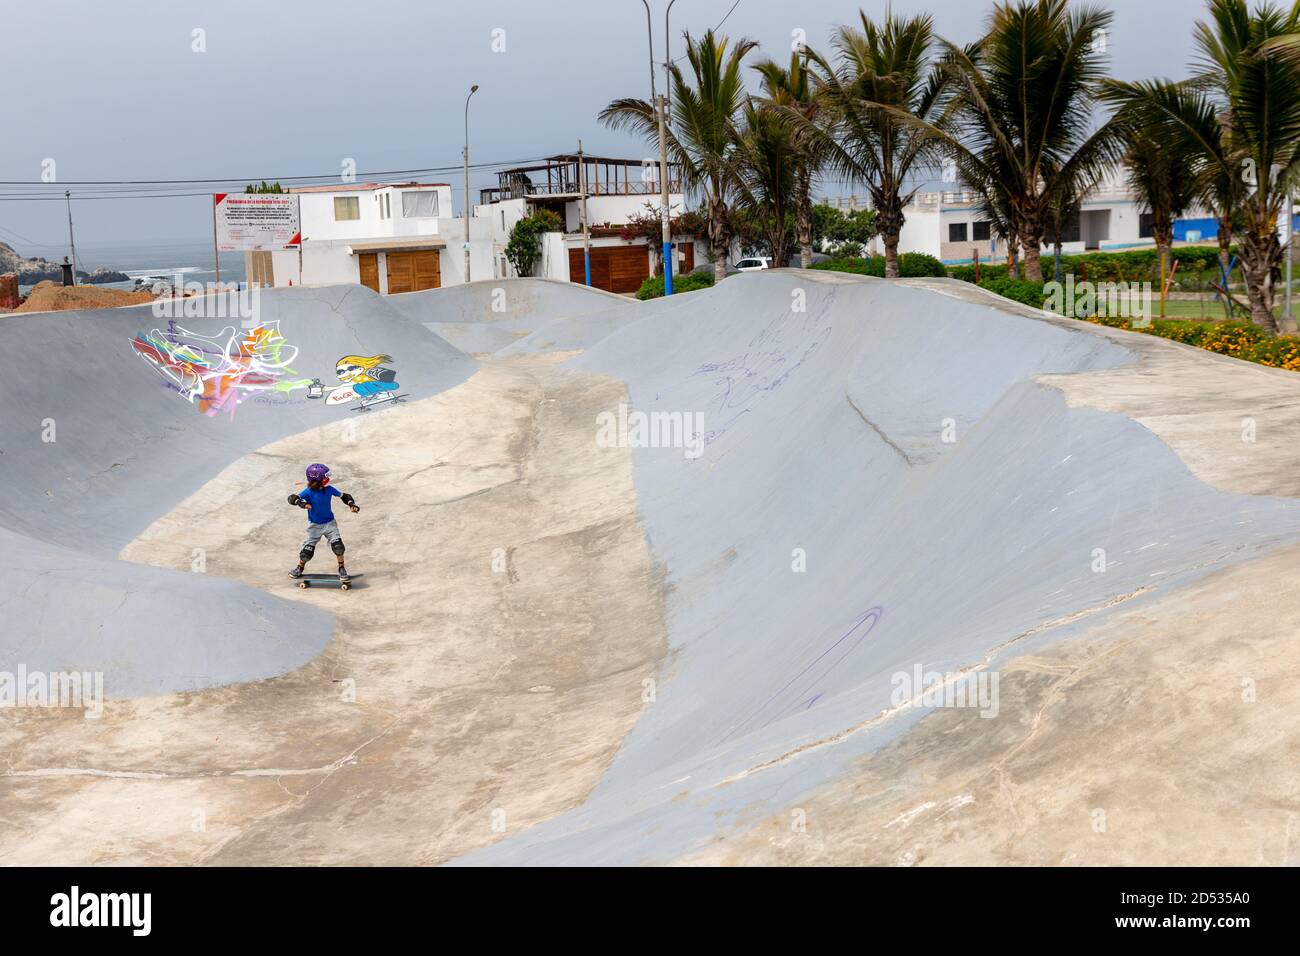 A young boy wearing trendy clothes, a purple helmet, and a face mask, skates in SKATEPARK SAN BARTOLO POZAS BOWLS during the pandemic period. Stock Photo